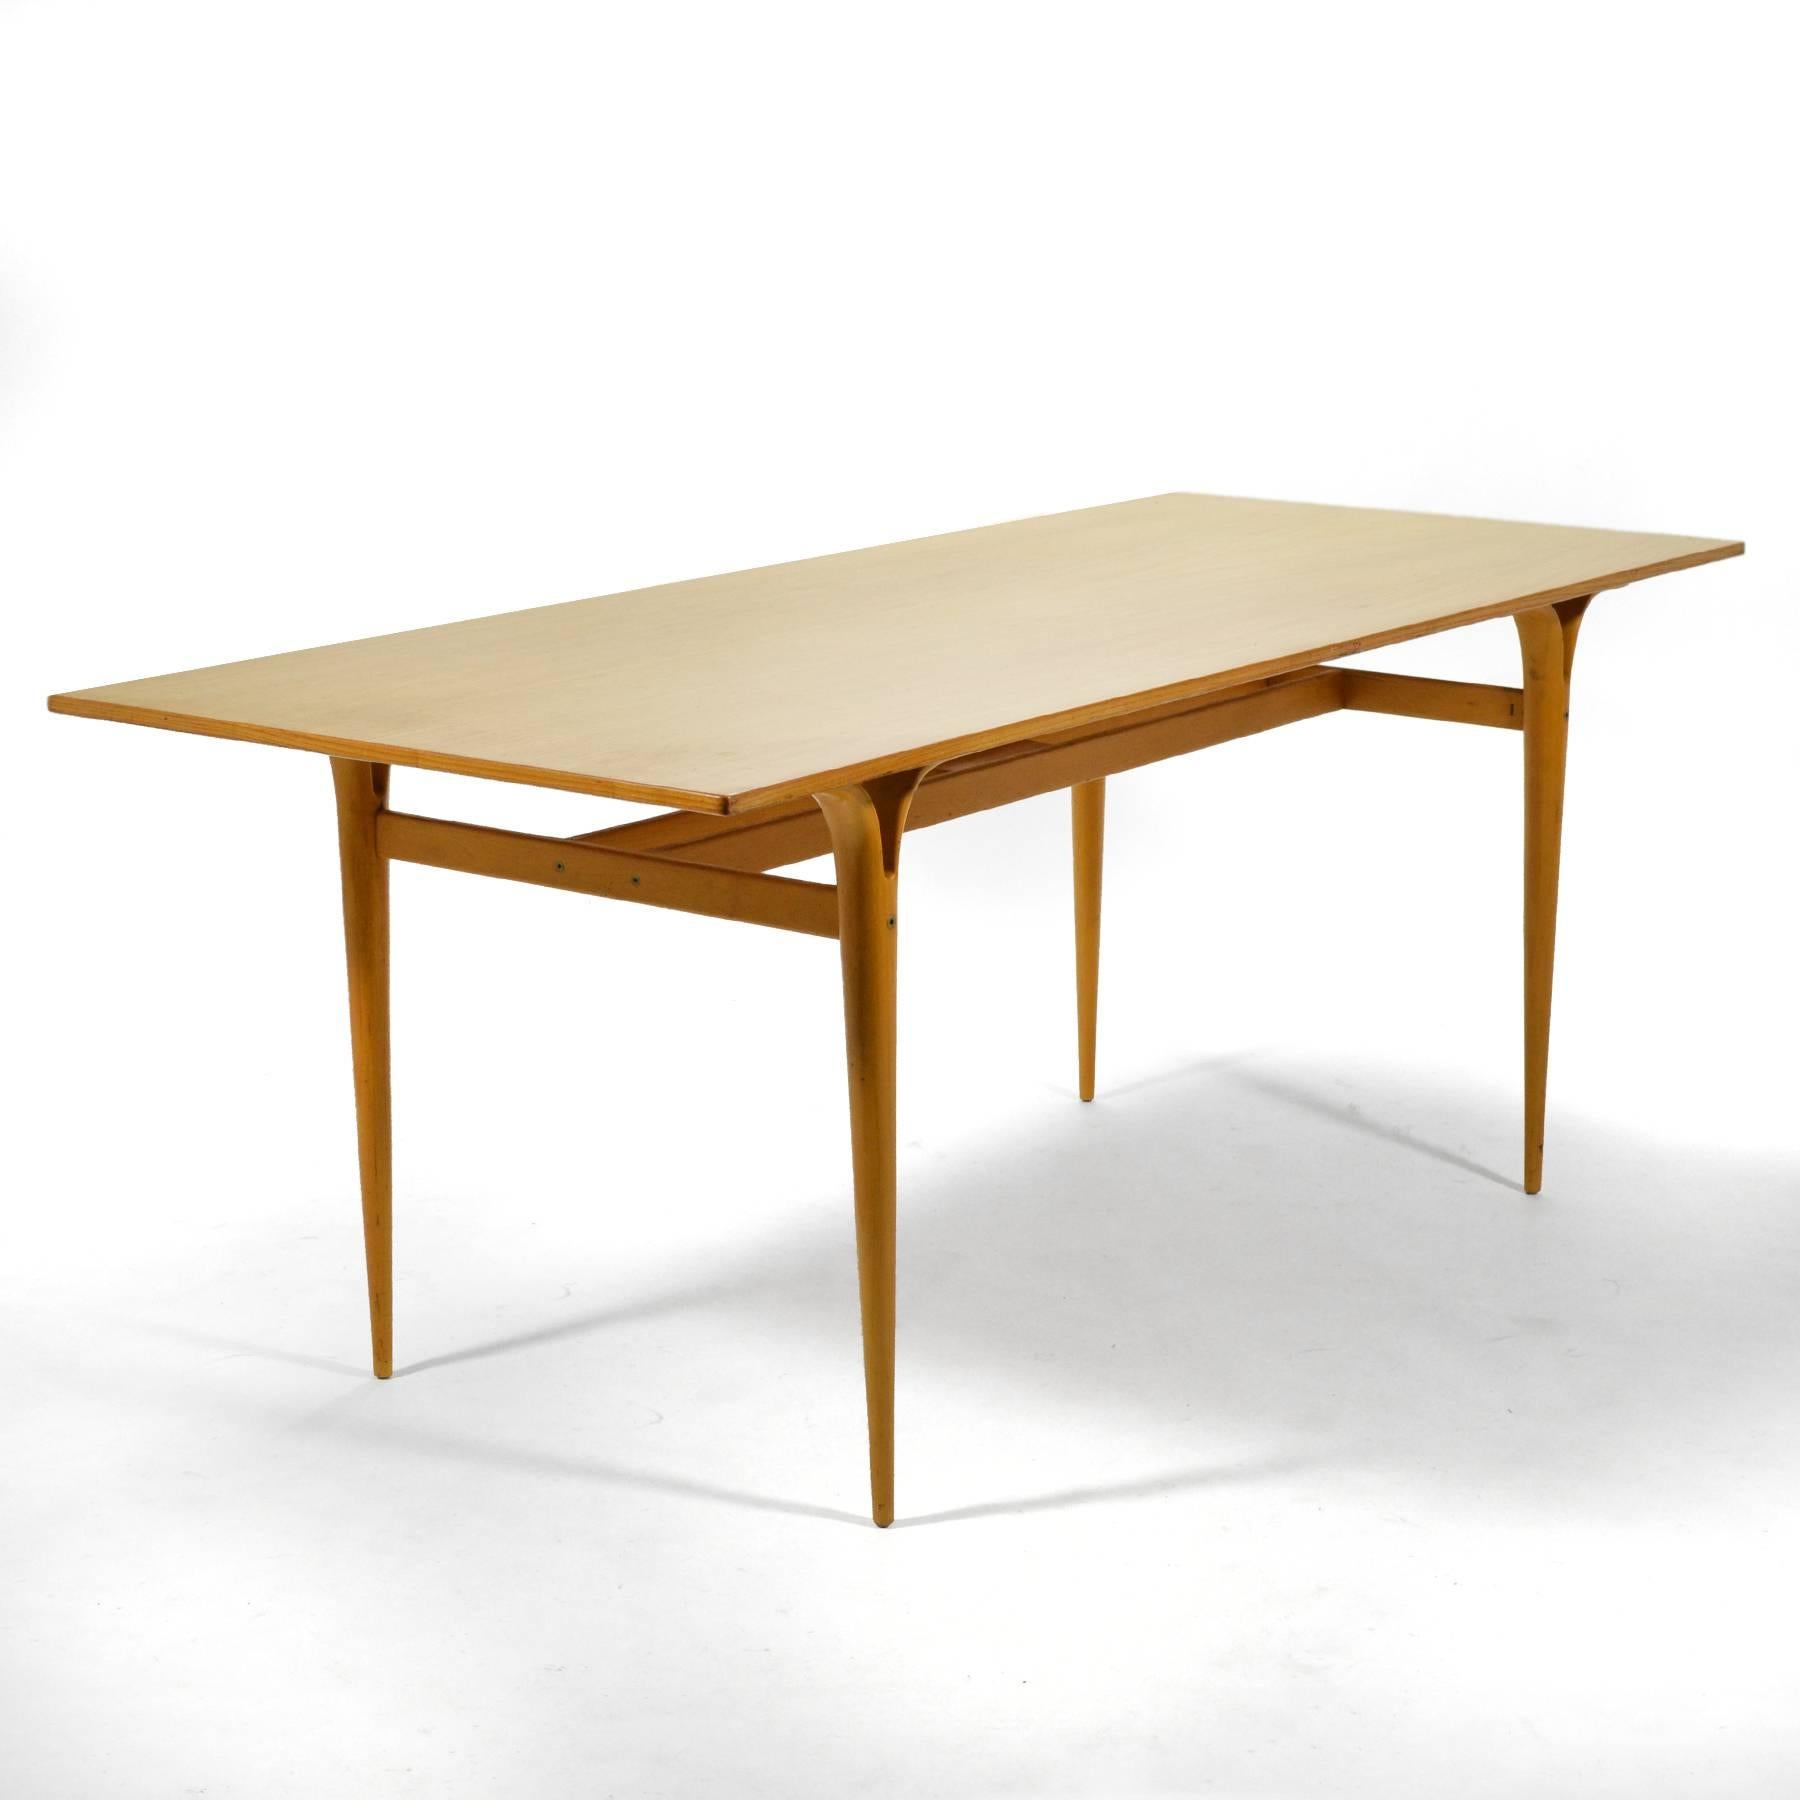 This table by Bruno Mathsson has beautiful sculptural qualities that his designs are known for and is scaled for use as a dining table, work table, or library table. The top of lovely figured ash is supported by a beech base.